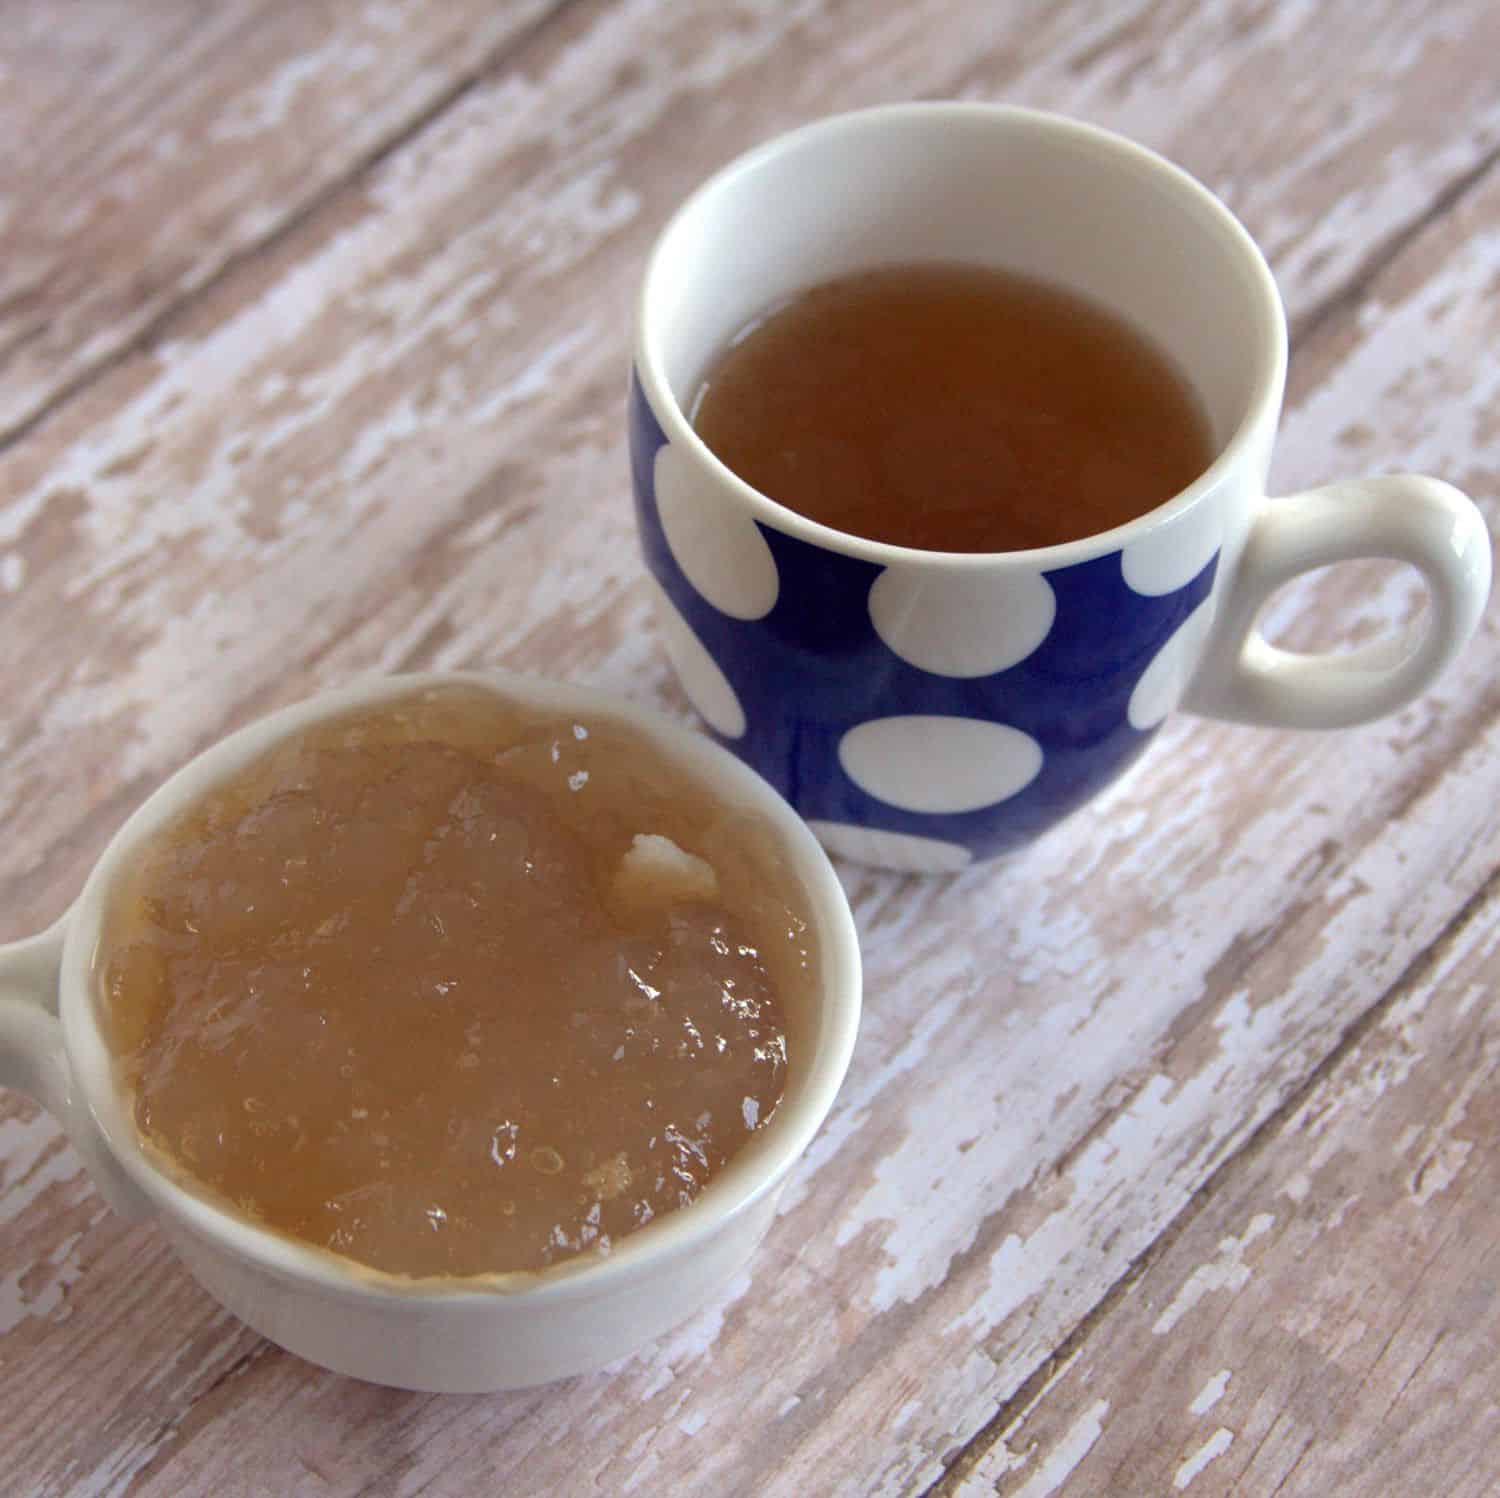 You won't believe how easy it is to make your own beef bone broth at home in no time!